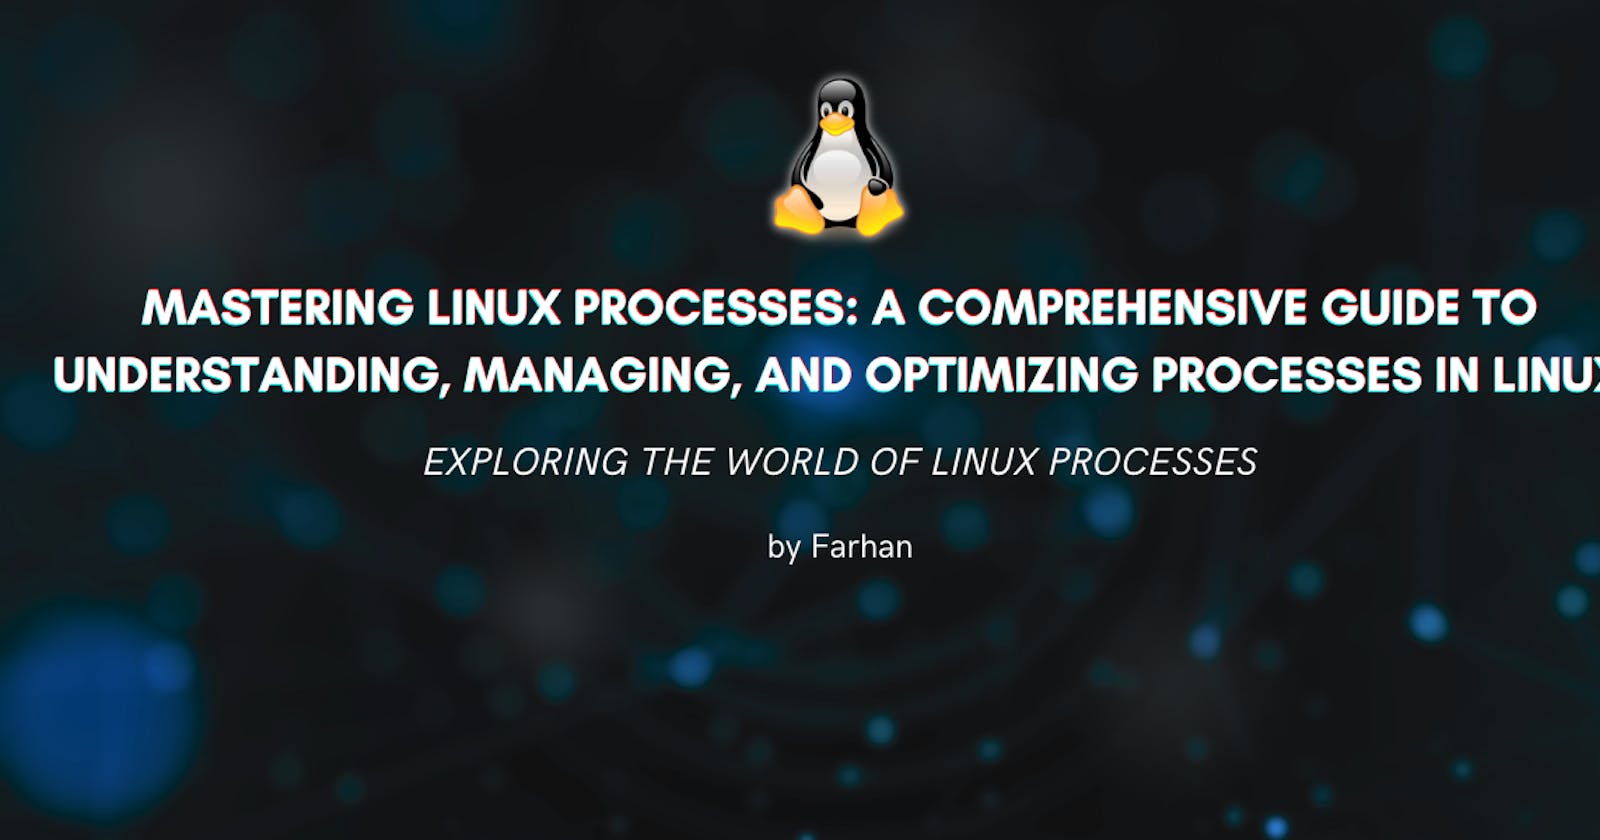 Mastering Linux Processes: A Comprehensive Guide to Understanding, Managing, and Optimizing Processes in Linux